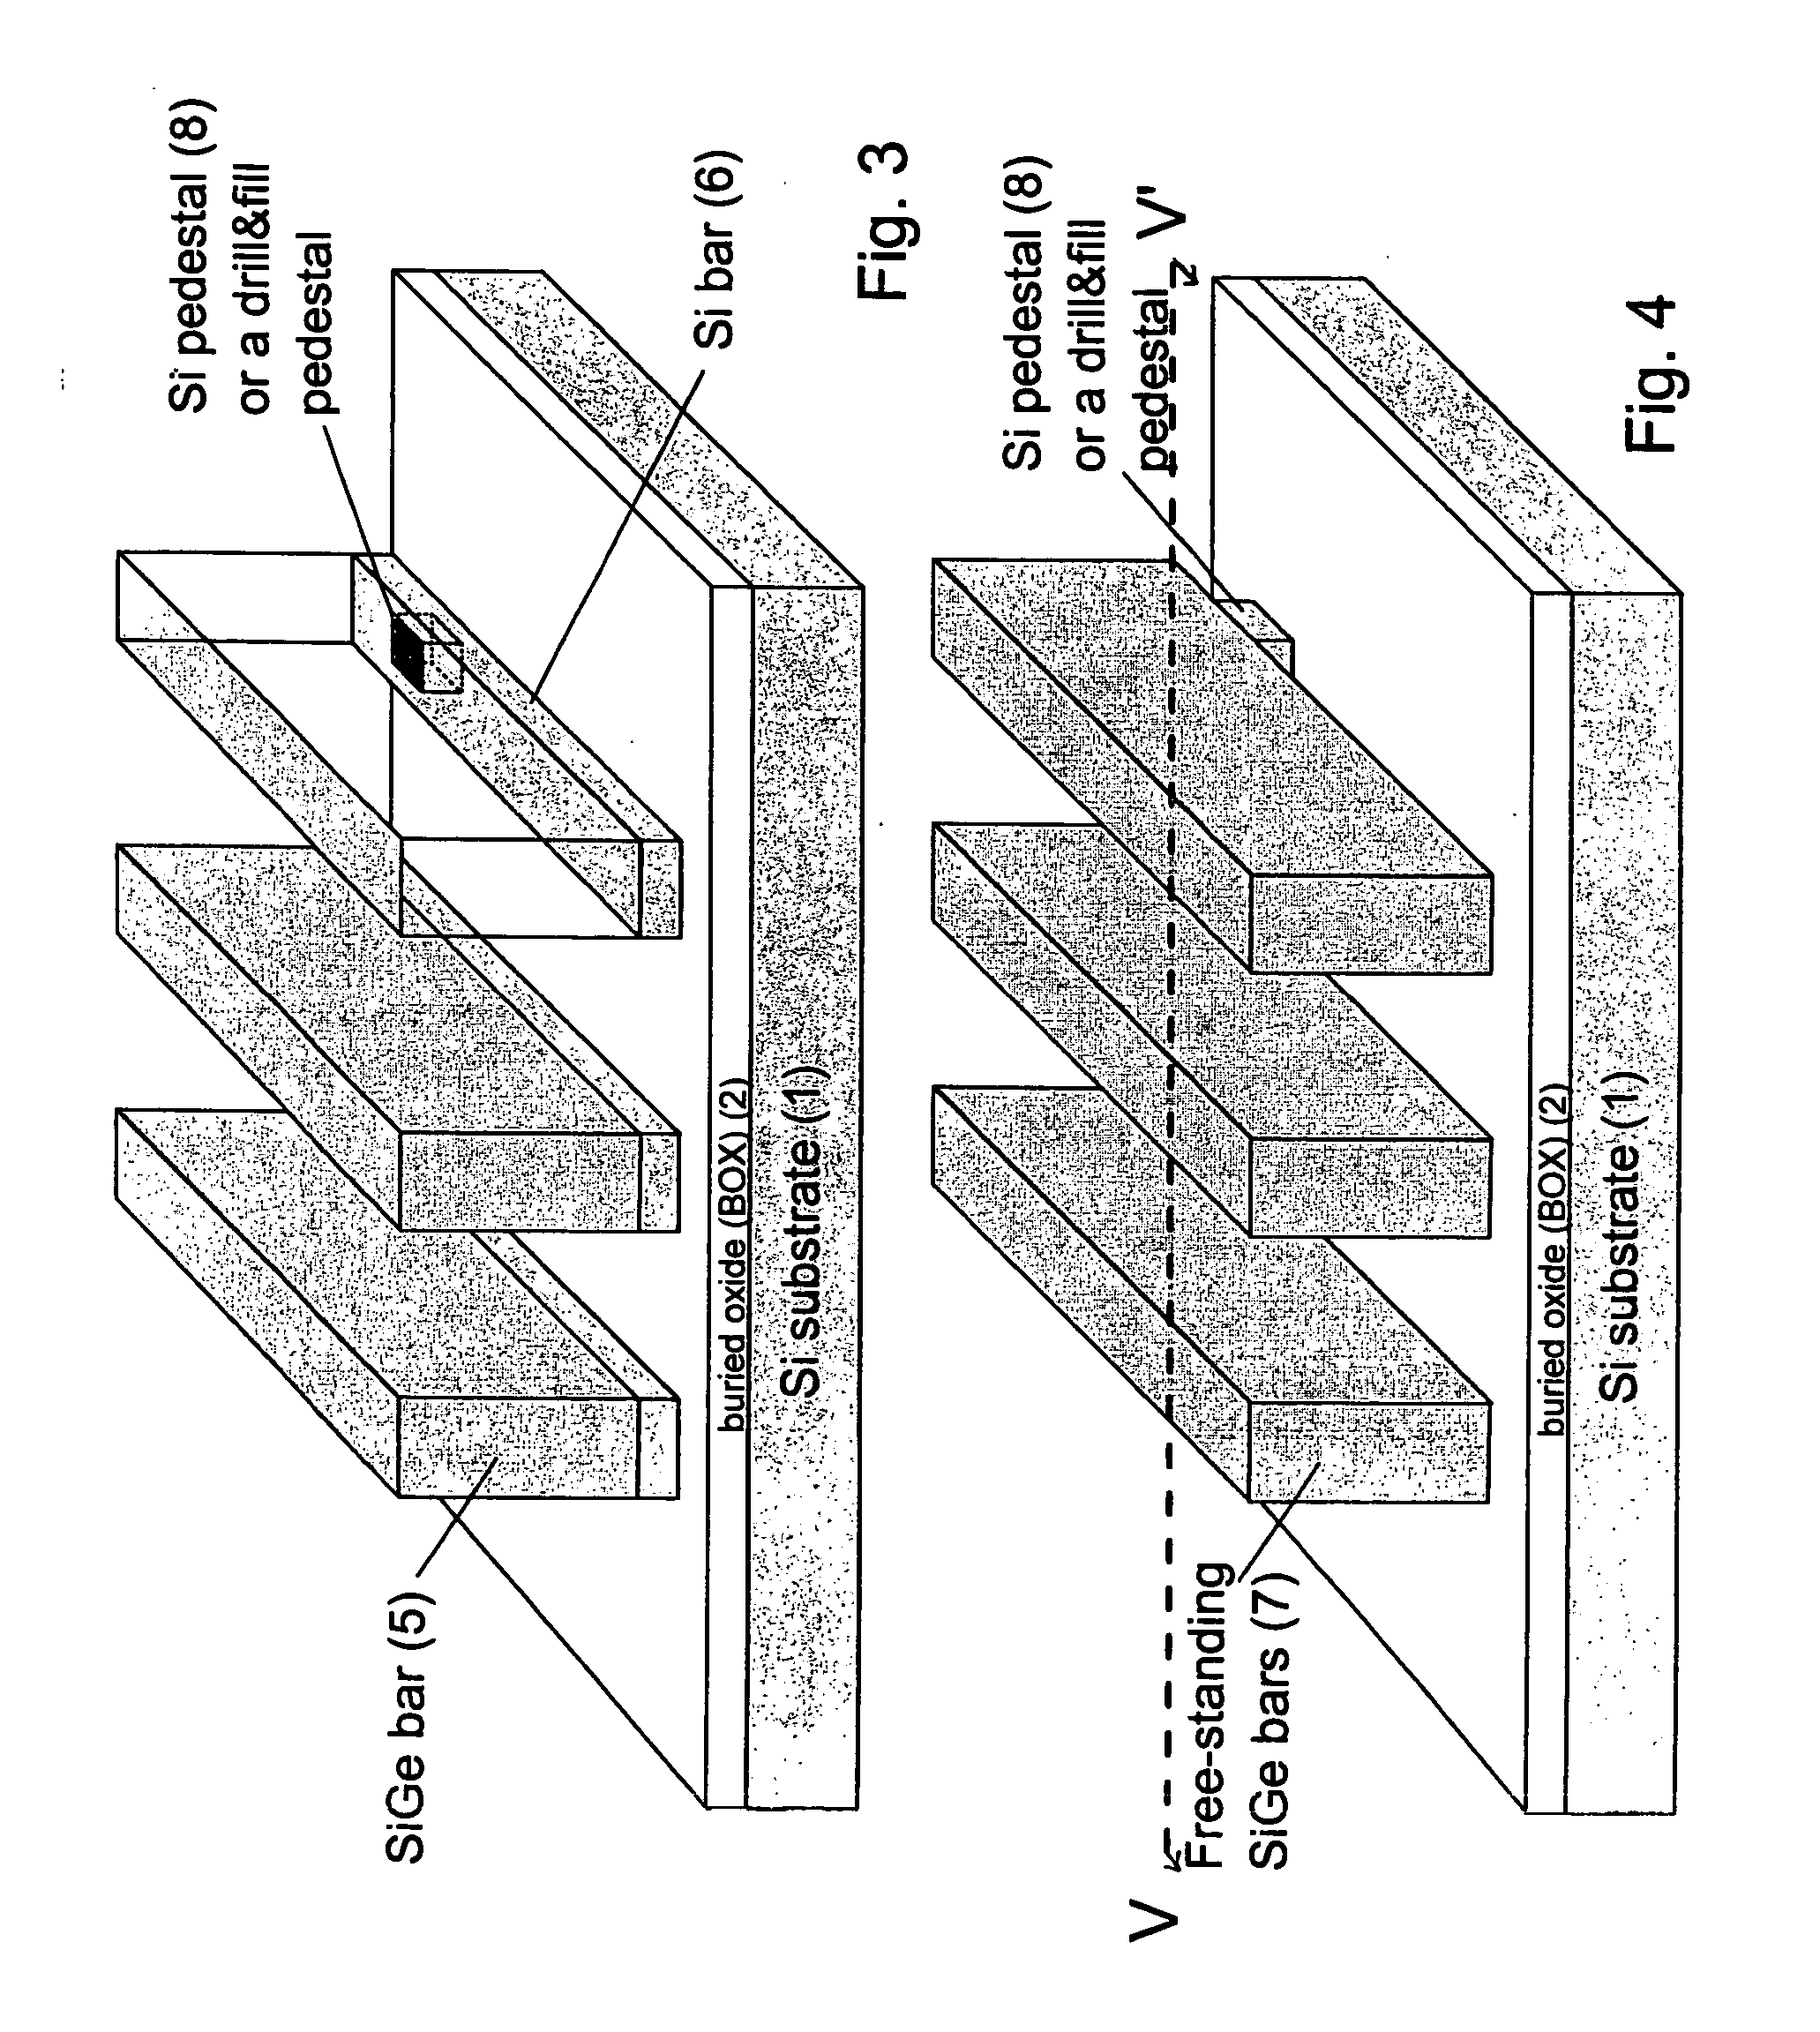 Strained-channel Fin field effect transistor (FET) with a uniform channel thickness and separate gates